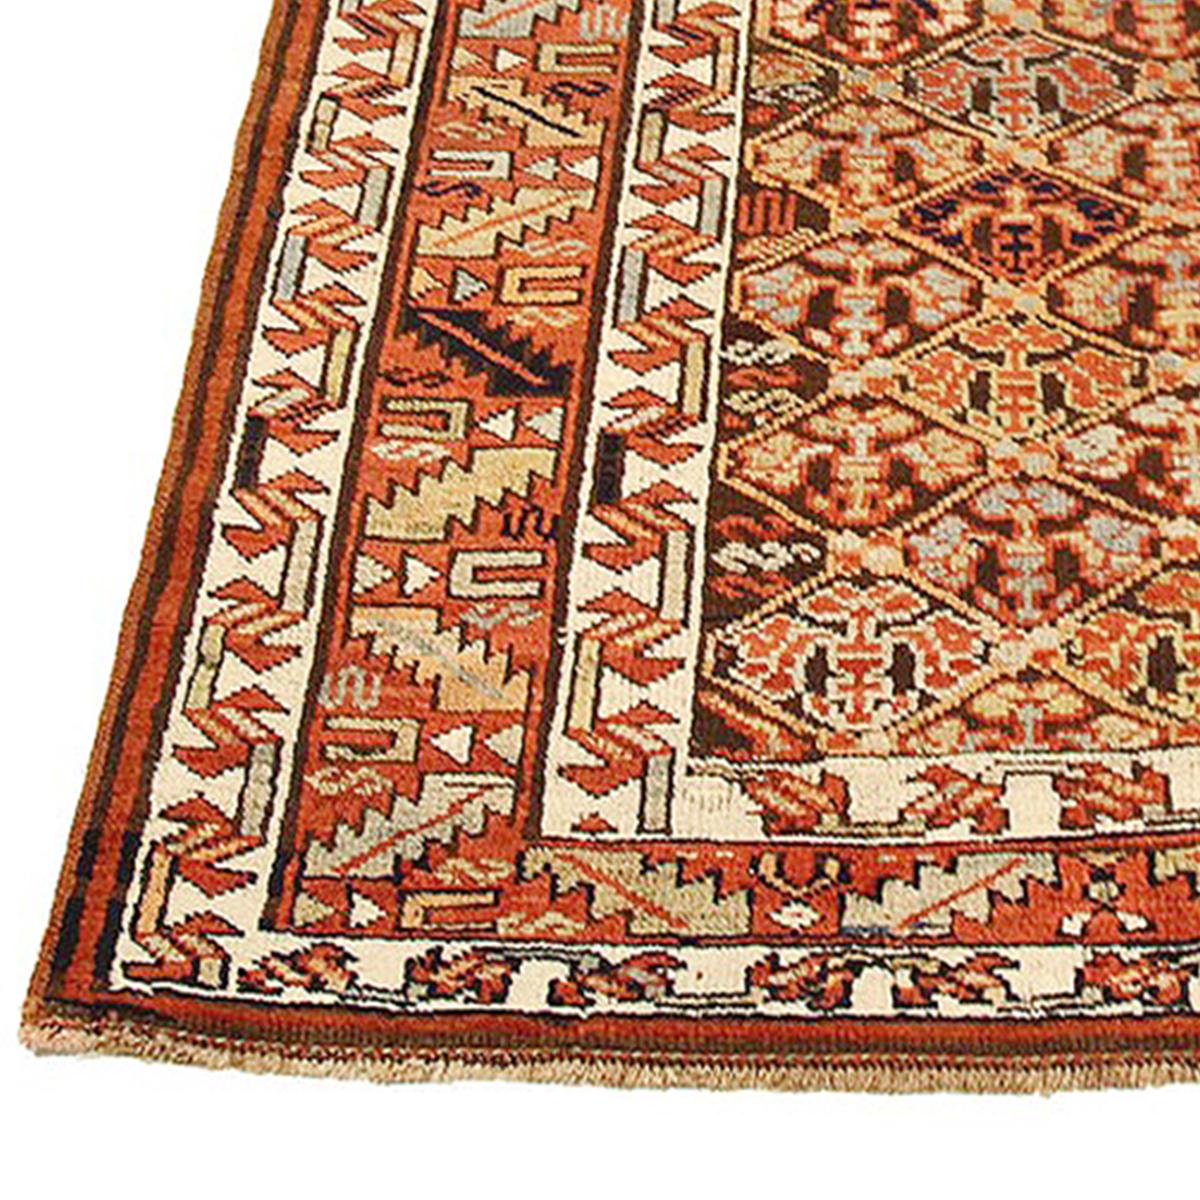 Antique Persian runner rug handwoven from the finest sheep’s wool and colored with all-natural vegetable dyes that are safe for humans and pets. It’s a traditional Bijar design featuring floral details in brown and red over an ivory field. It’s a